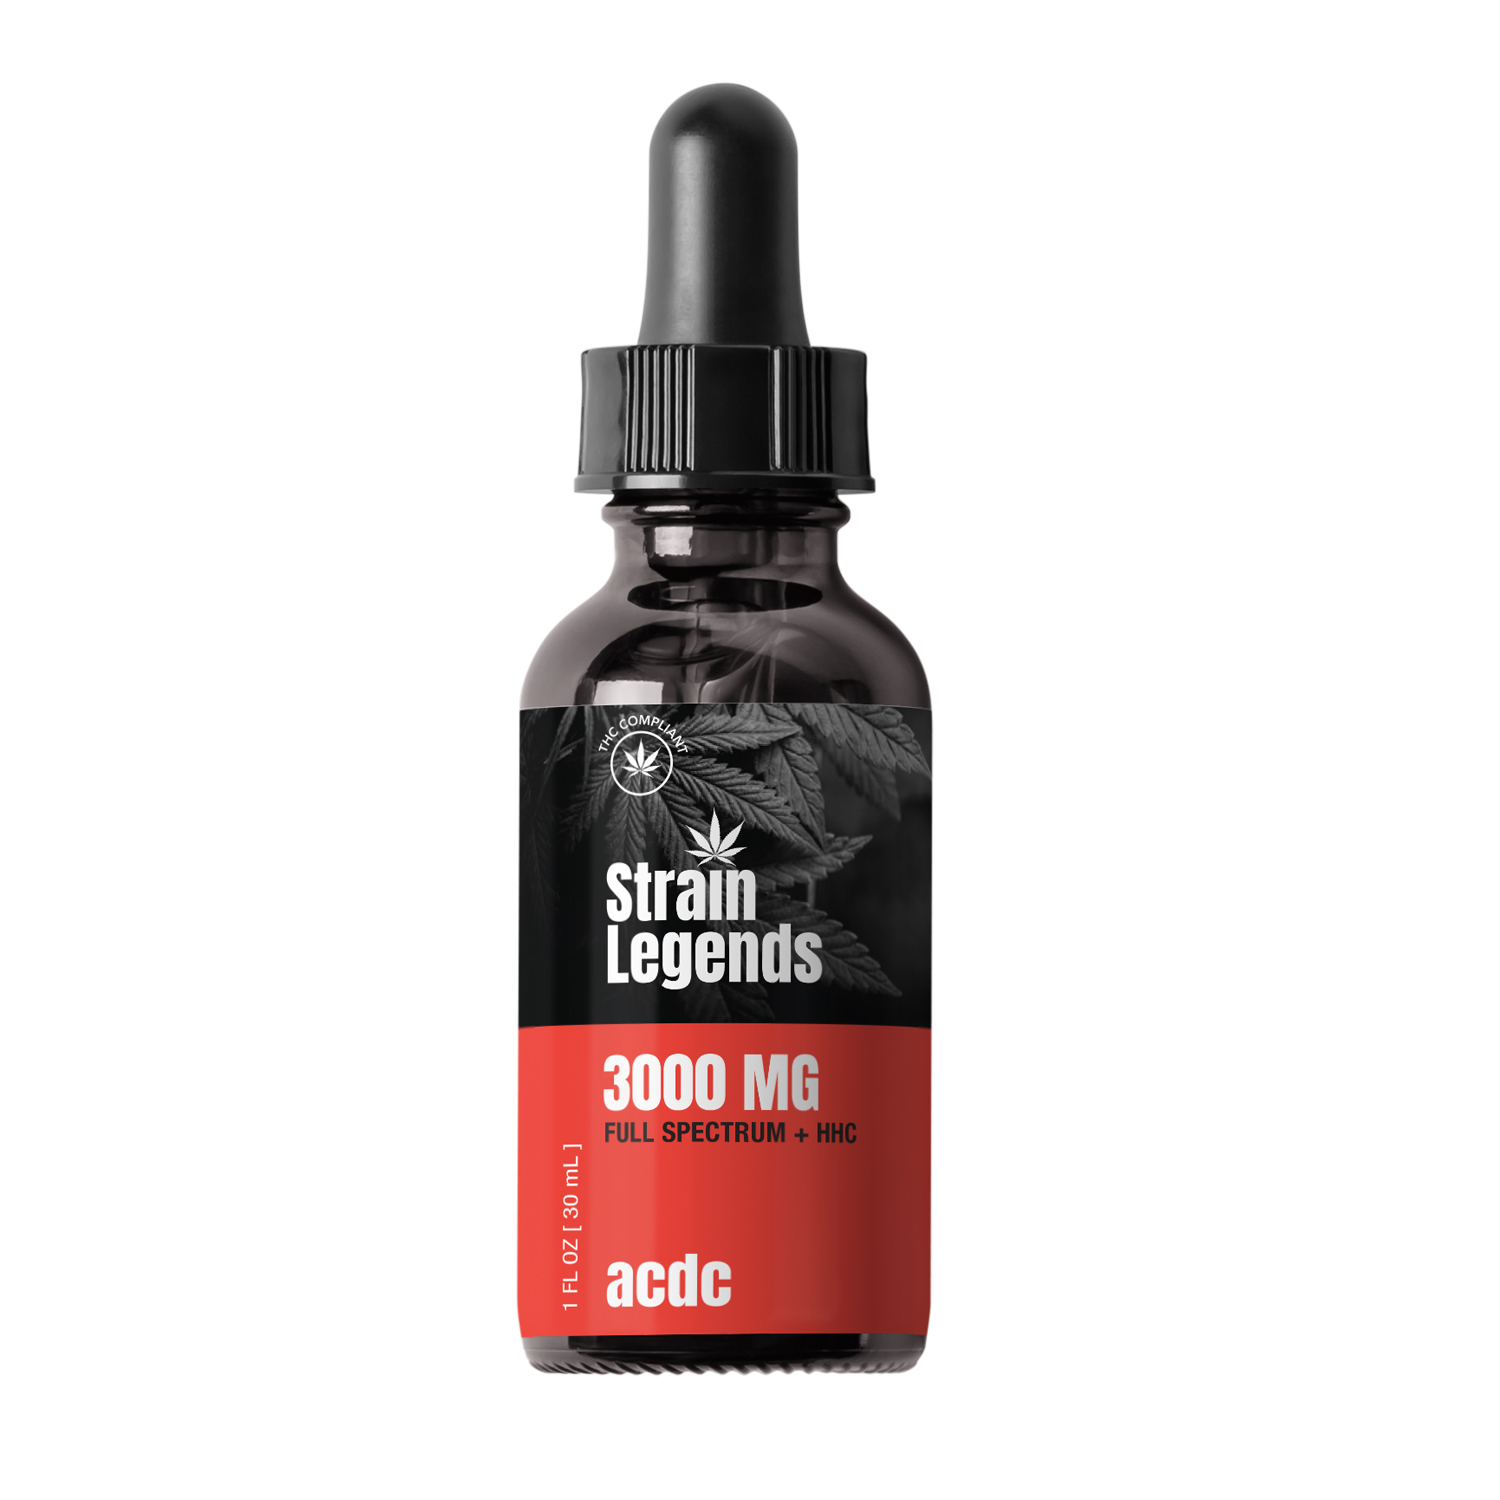 Strain-Legends-3000mg-Tincture-ACDC